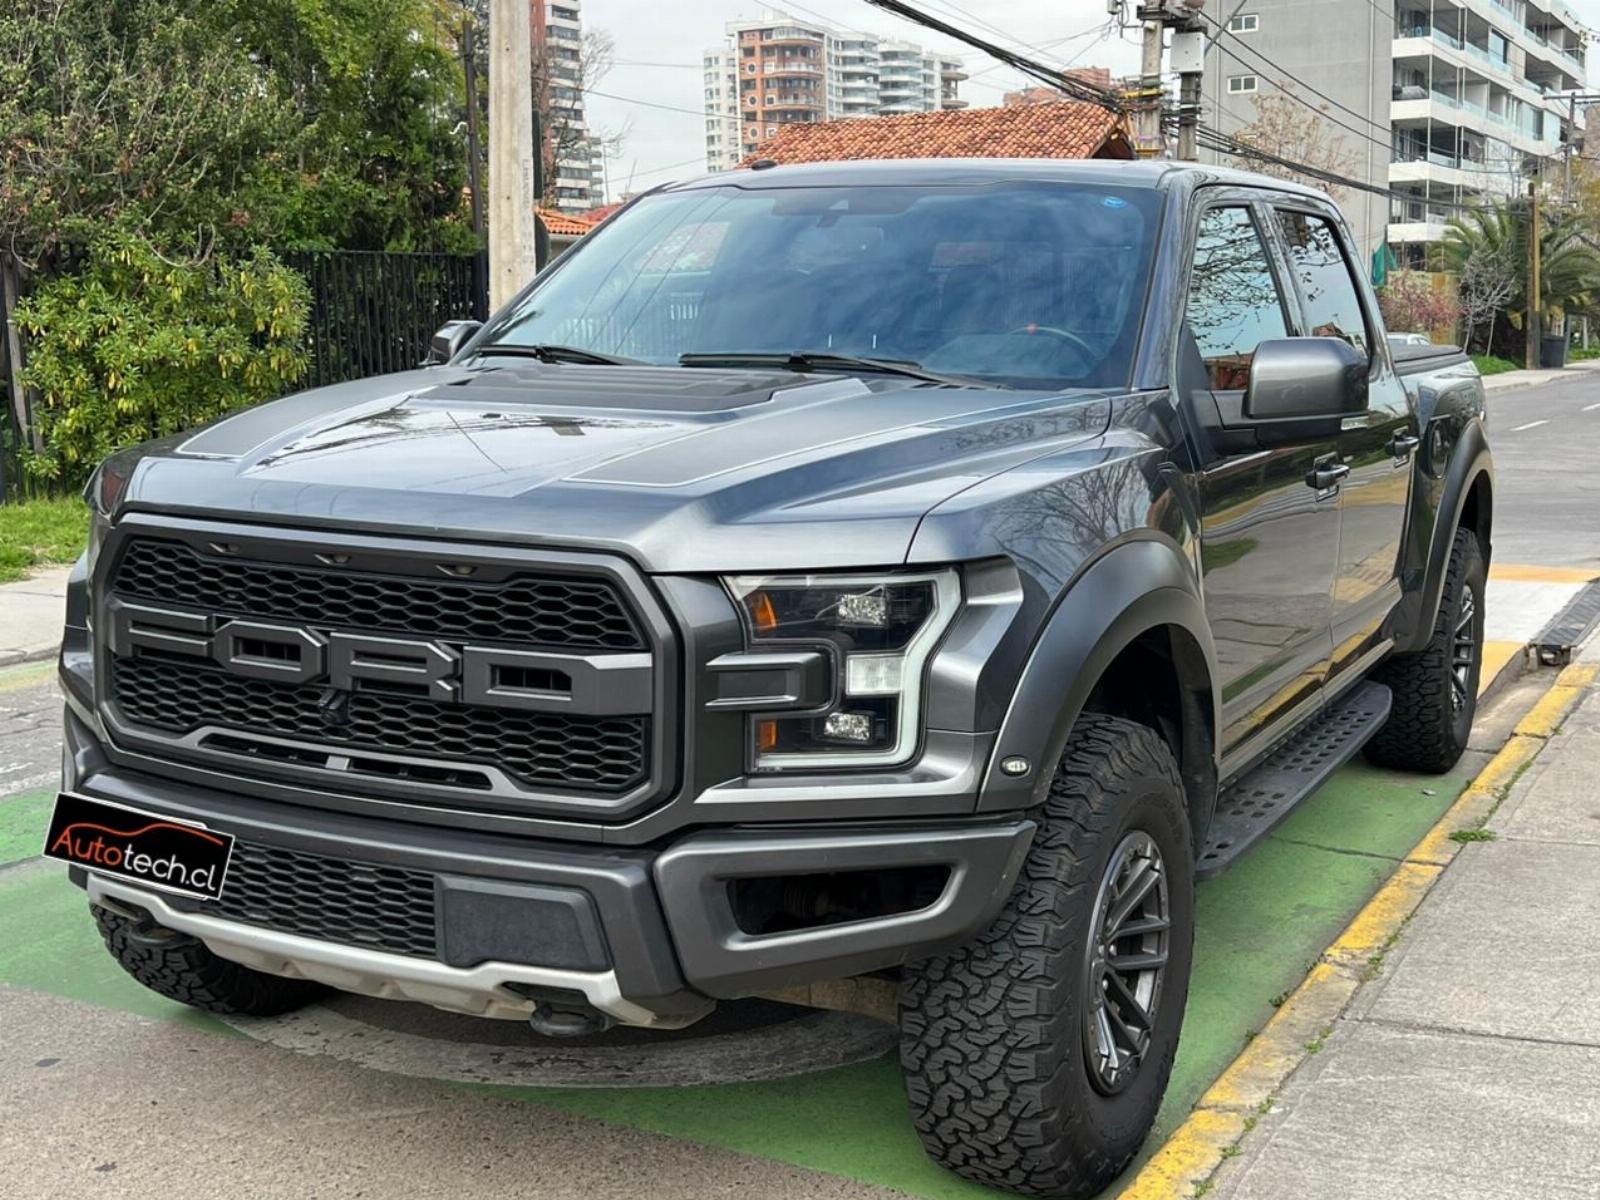 FORD F-150 Ford F-150 3.5 Raptor Auto Ecoboost 4WD 2021 Ford F-150 3.5 Raptor Auto Ecoboost 4WD - AUTOTECH